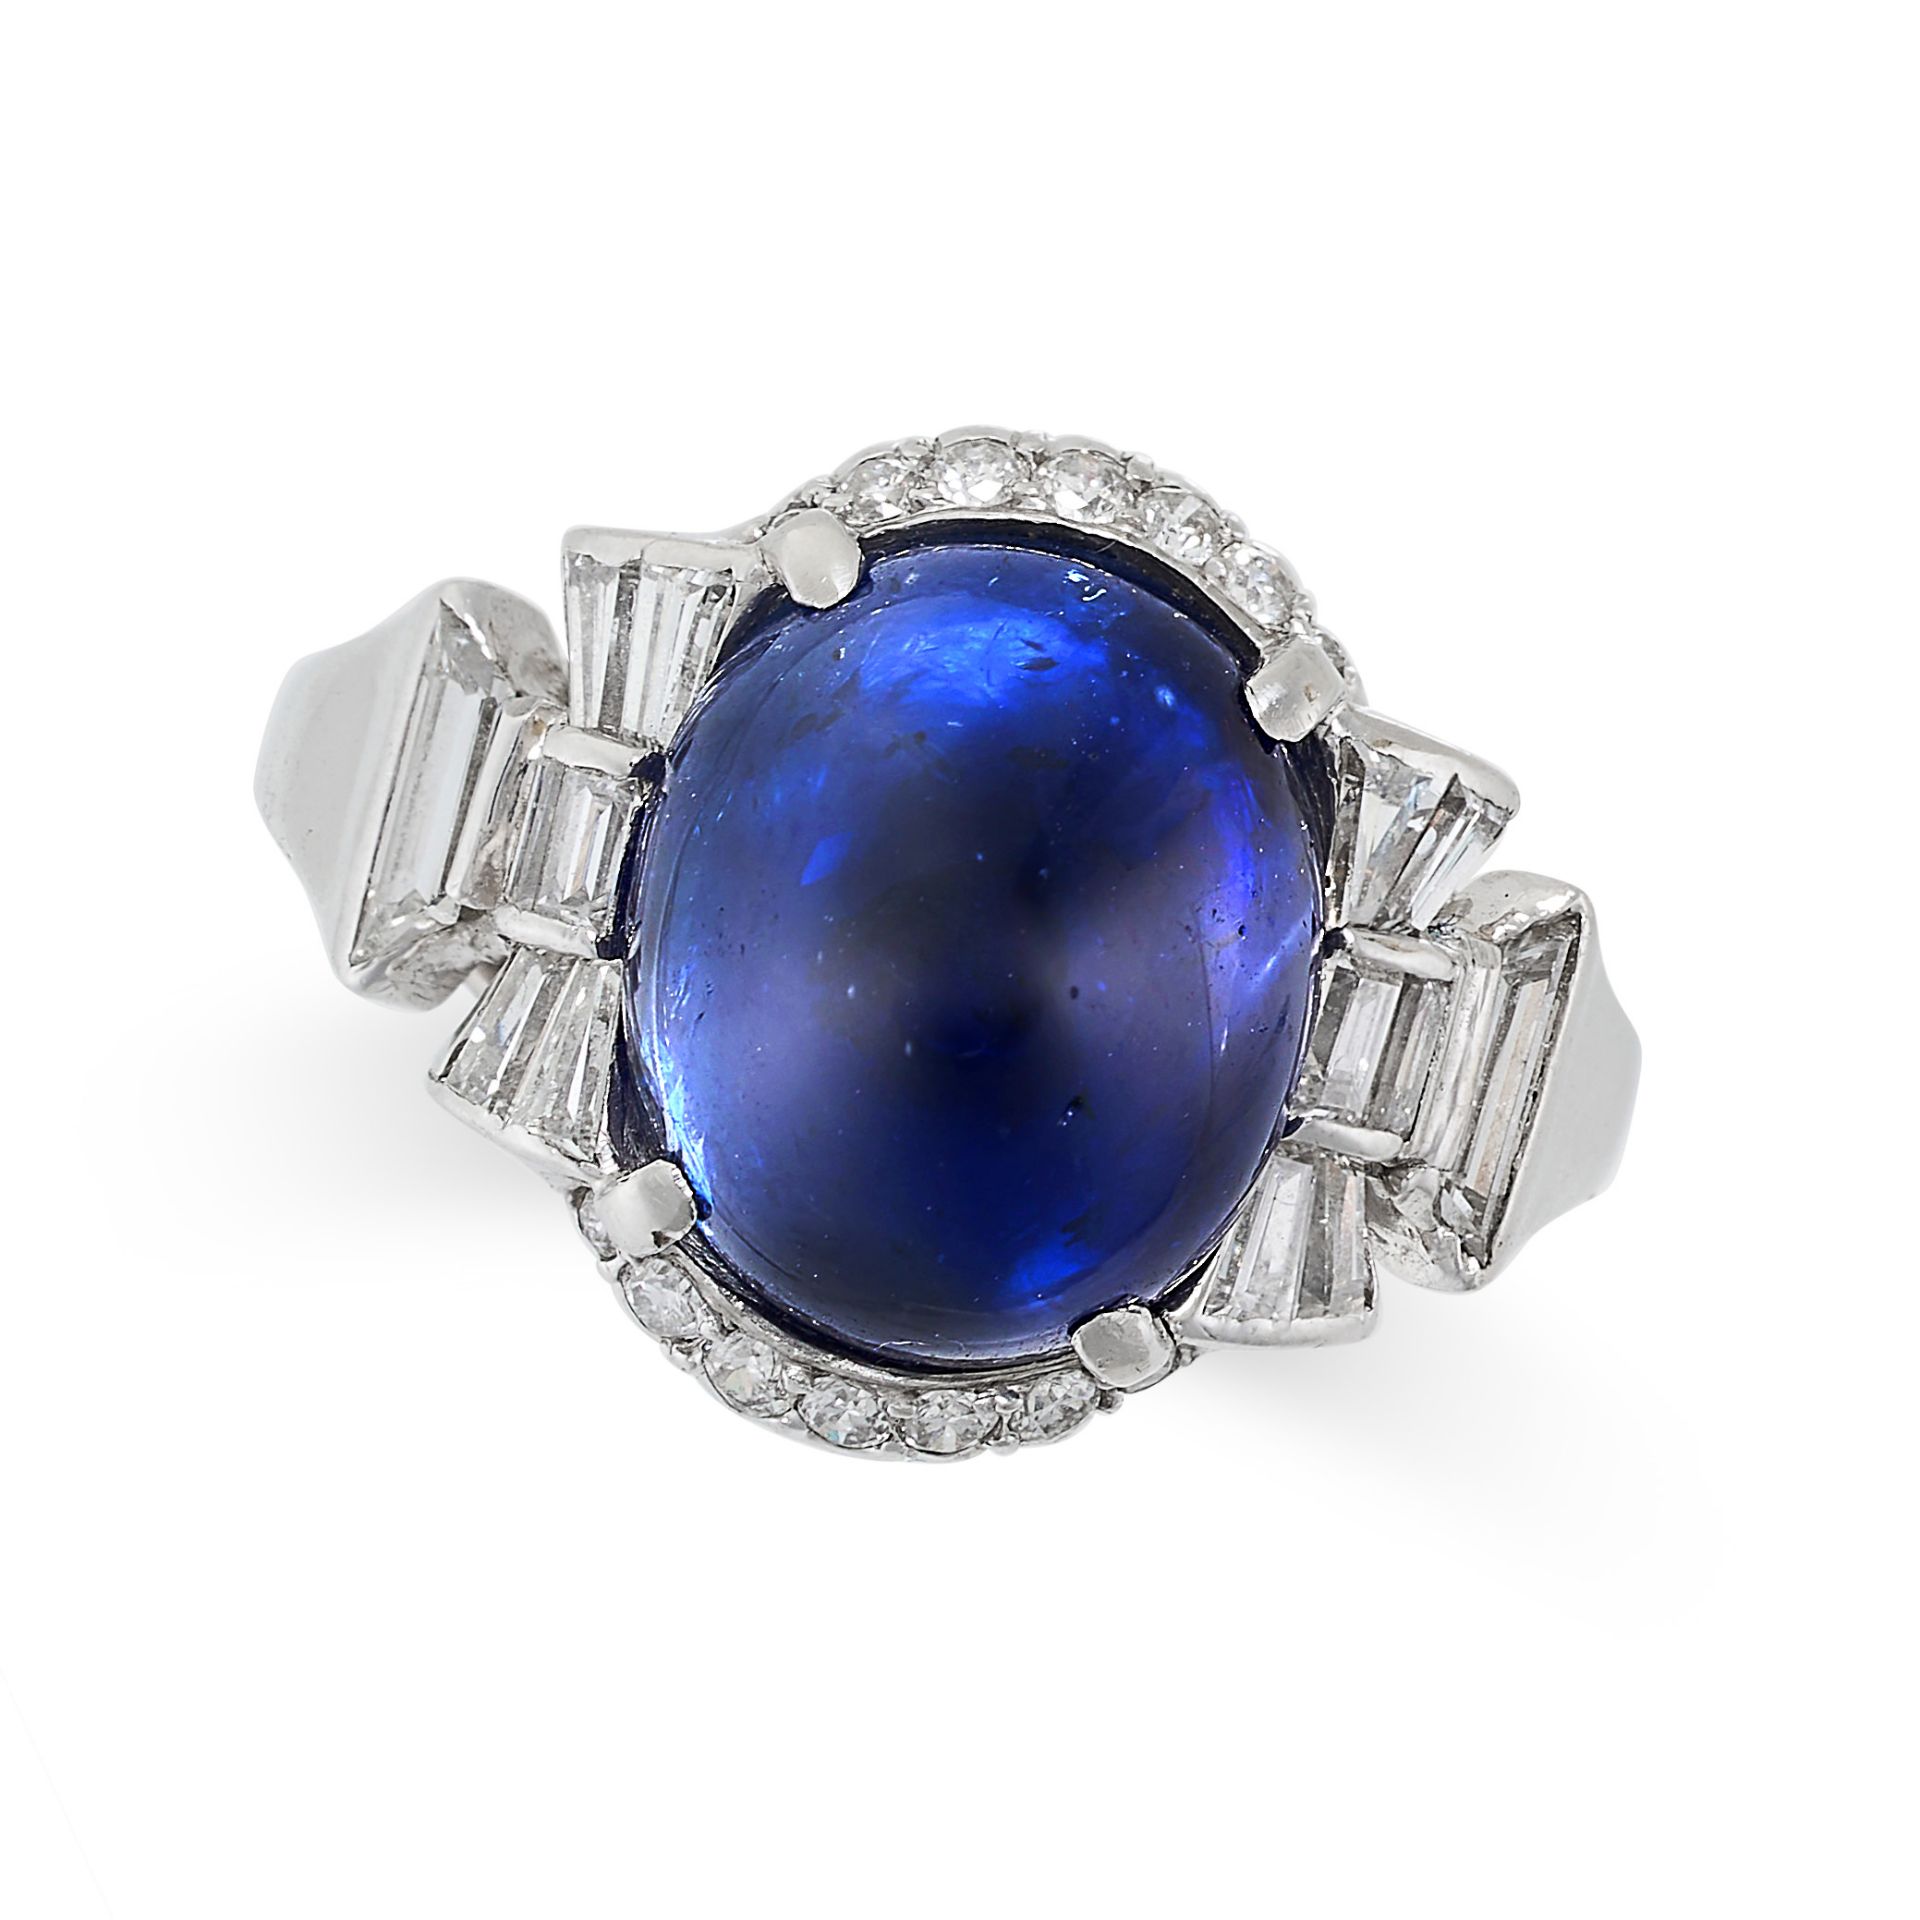 A SAPPHIRE AND DIAMOND RING set with a sugarloaf cabochon sapphire of 6.30 carats, accented by round